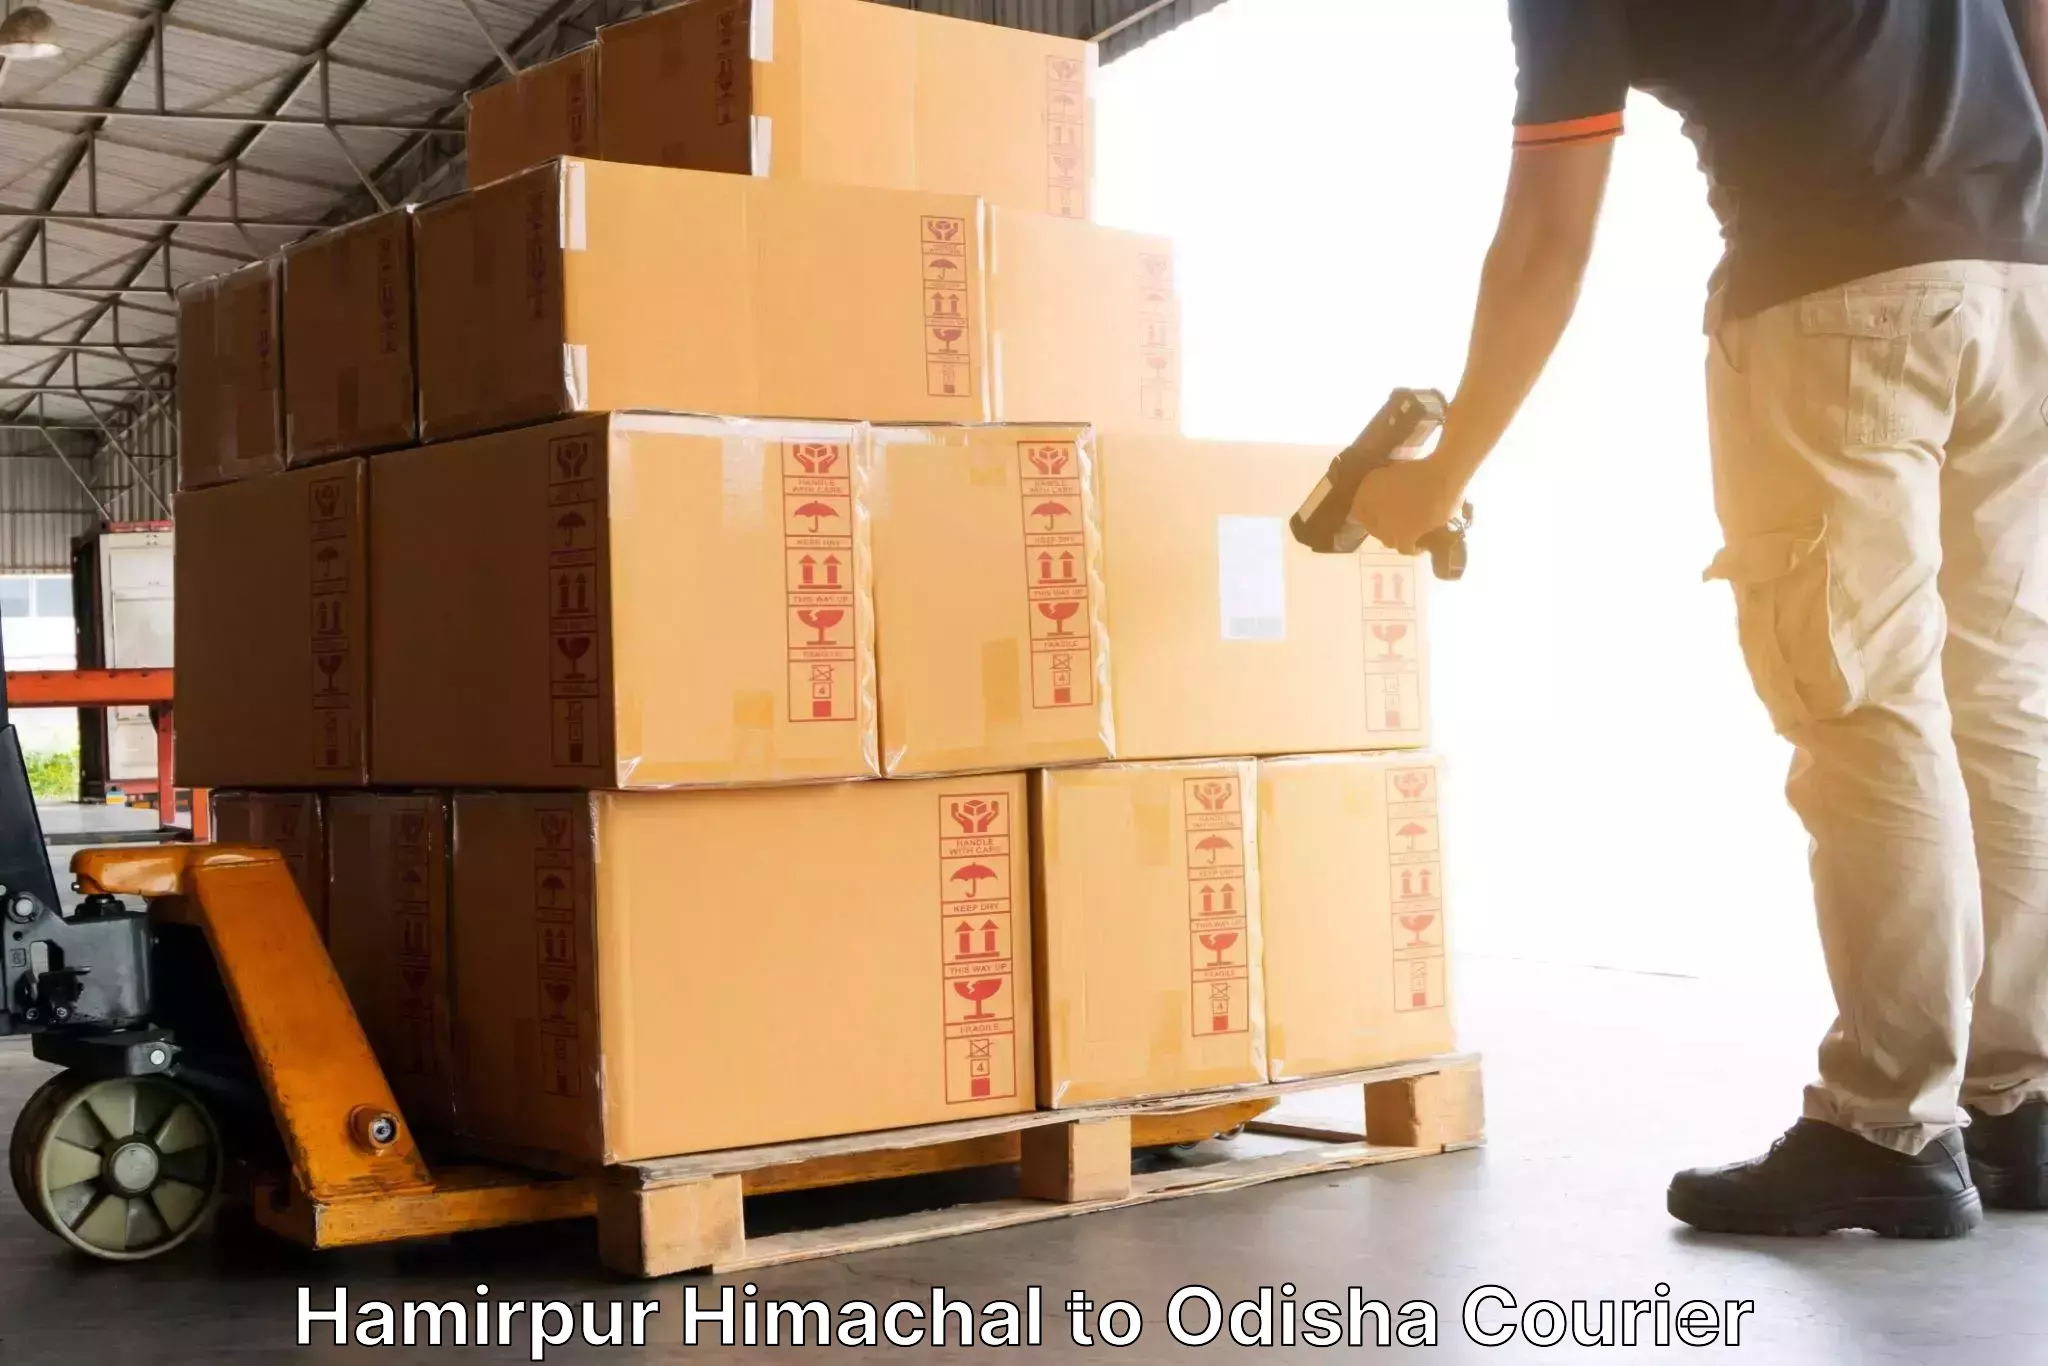 Tech-enabled shipping Hamirpur Himachal to Barkote